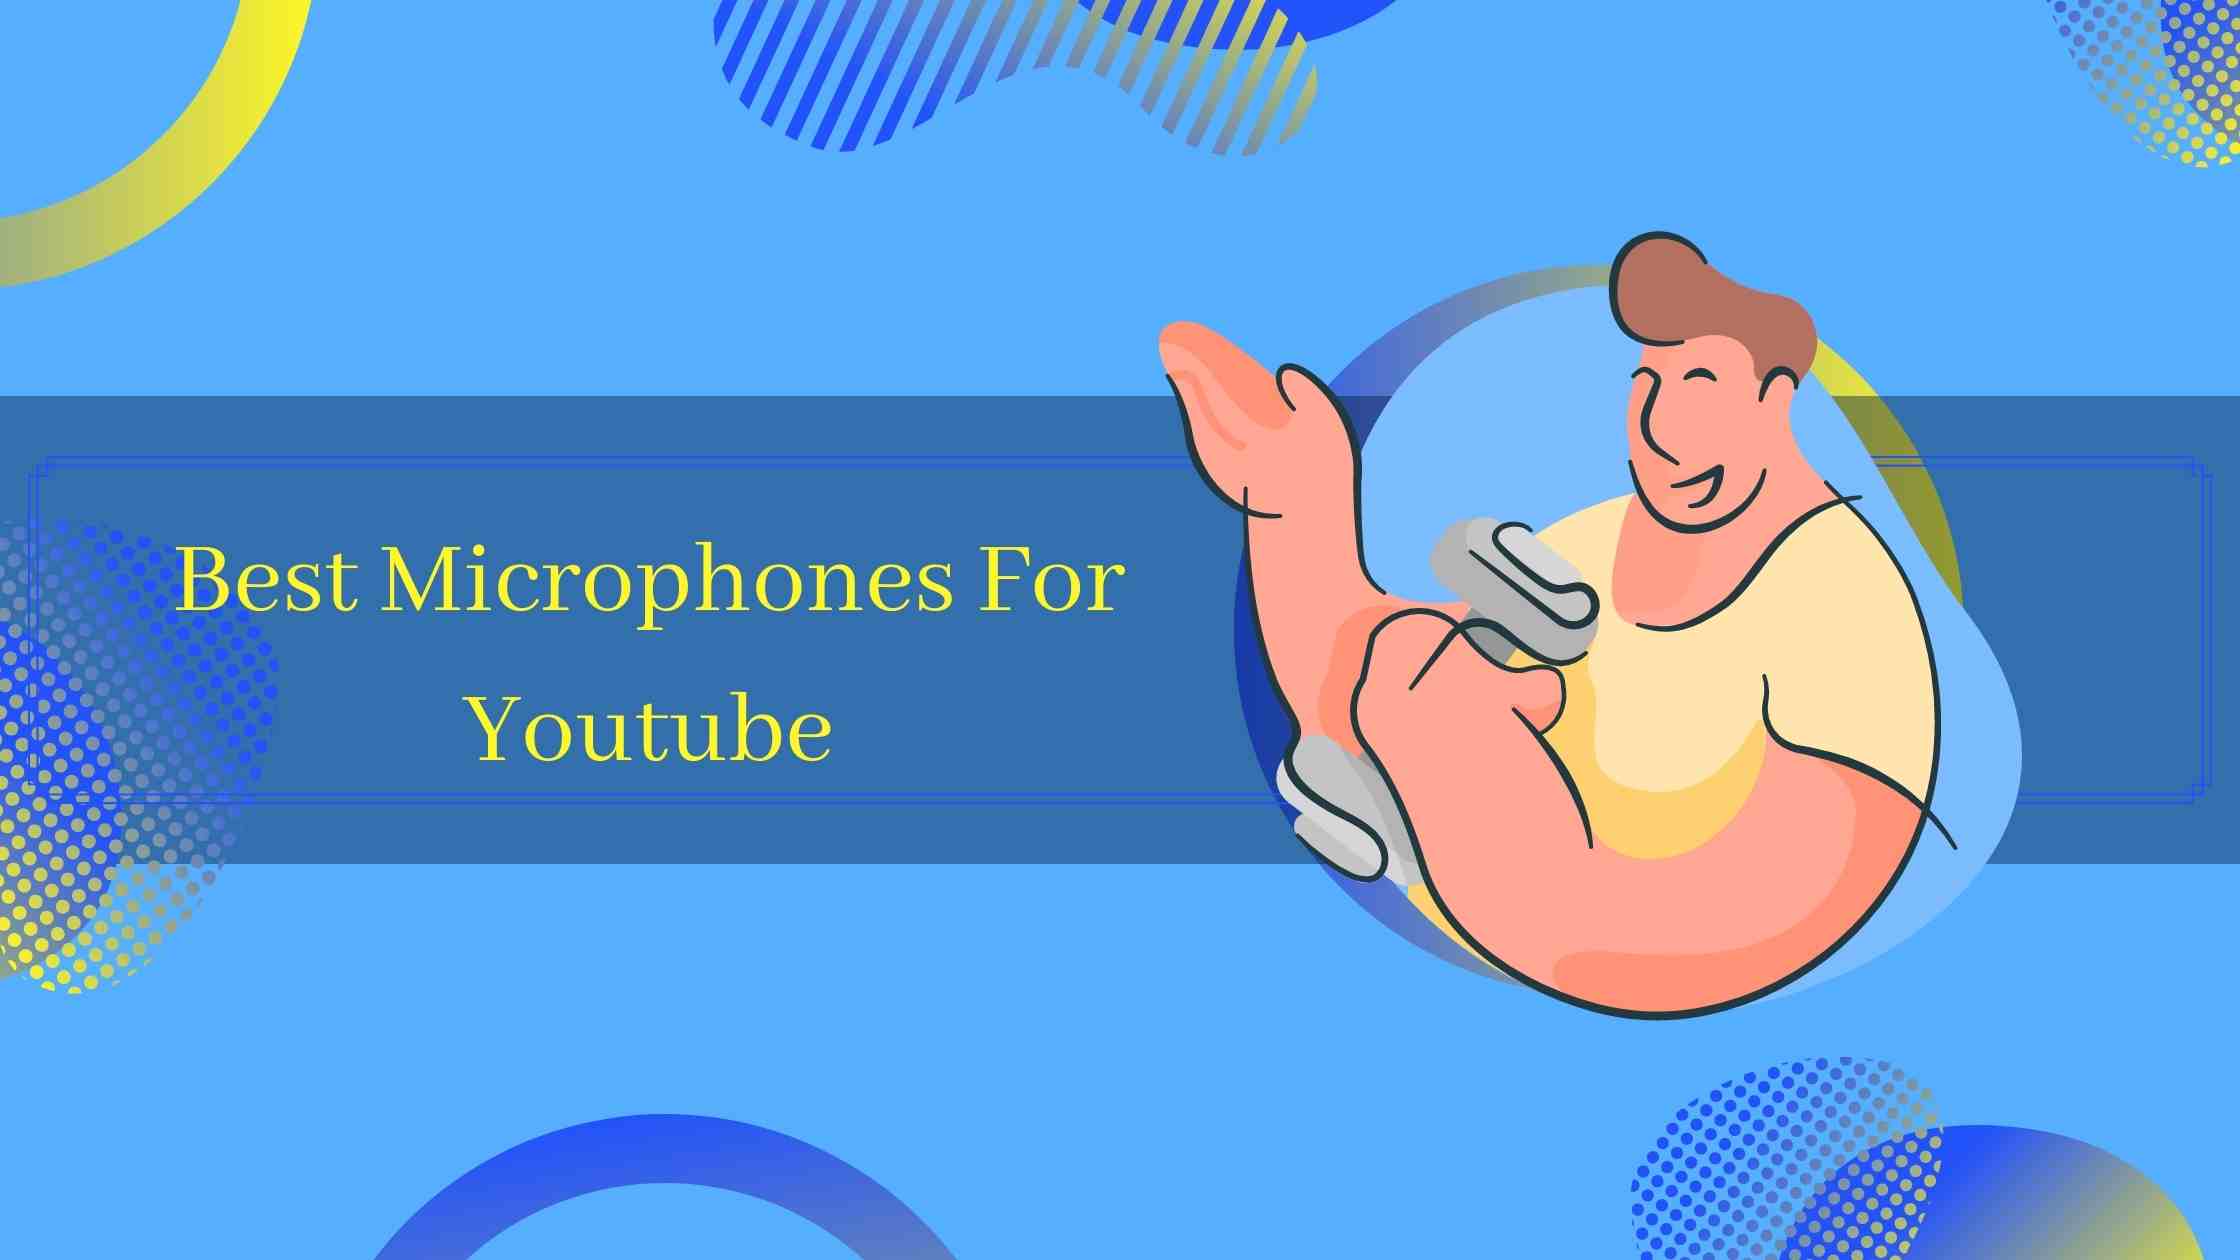 It's the best microphone for Youtubers that are just getting started and more advanced video creators as well.